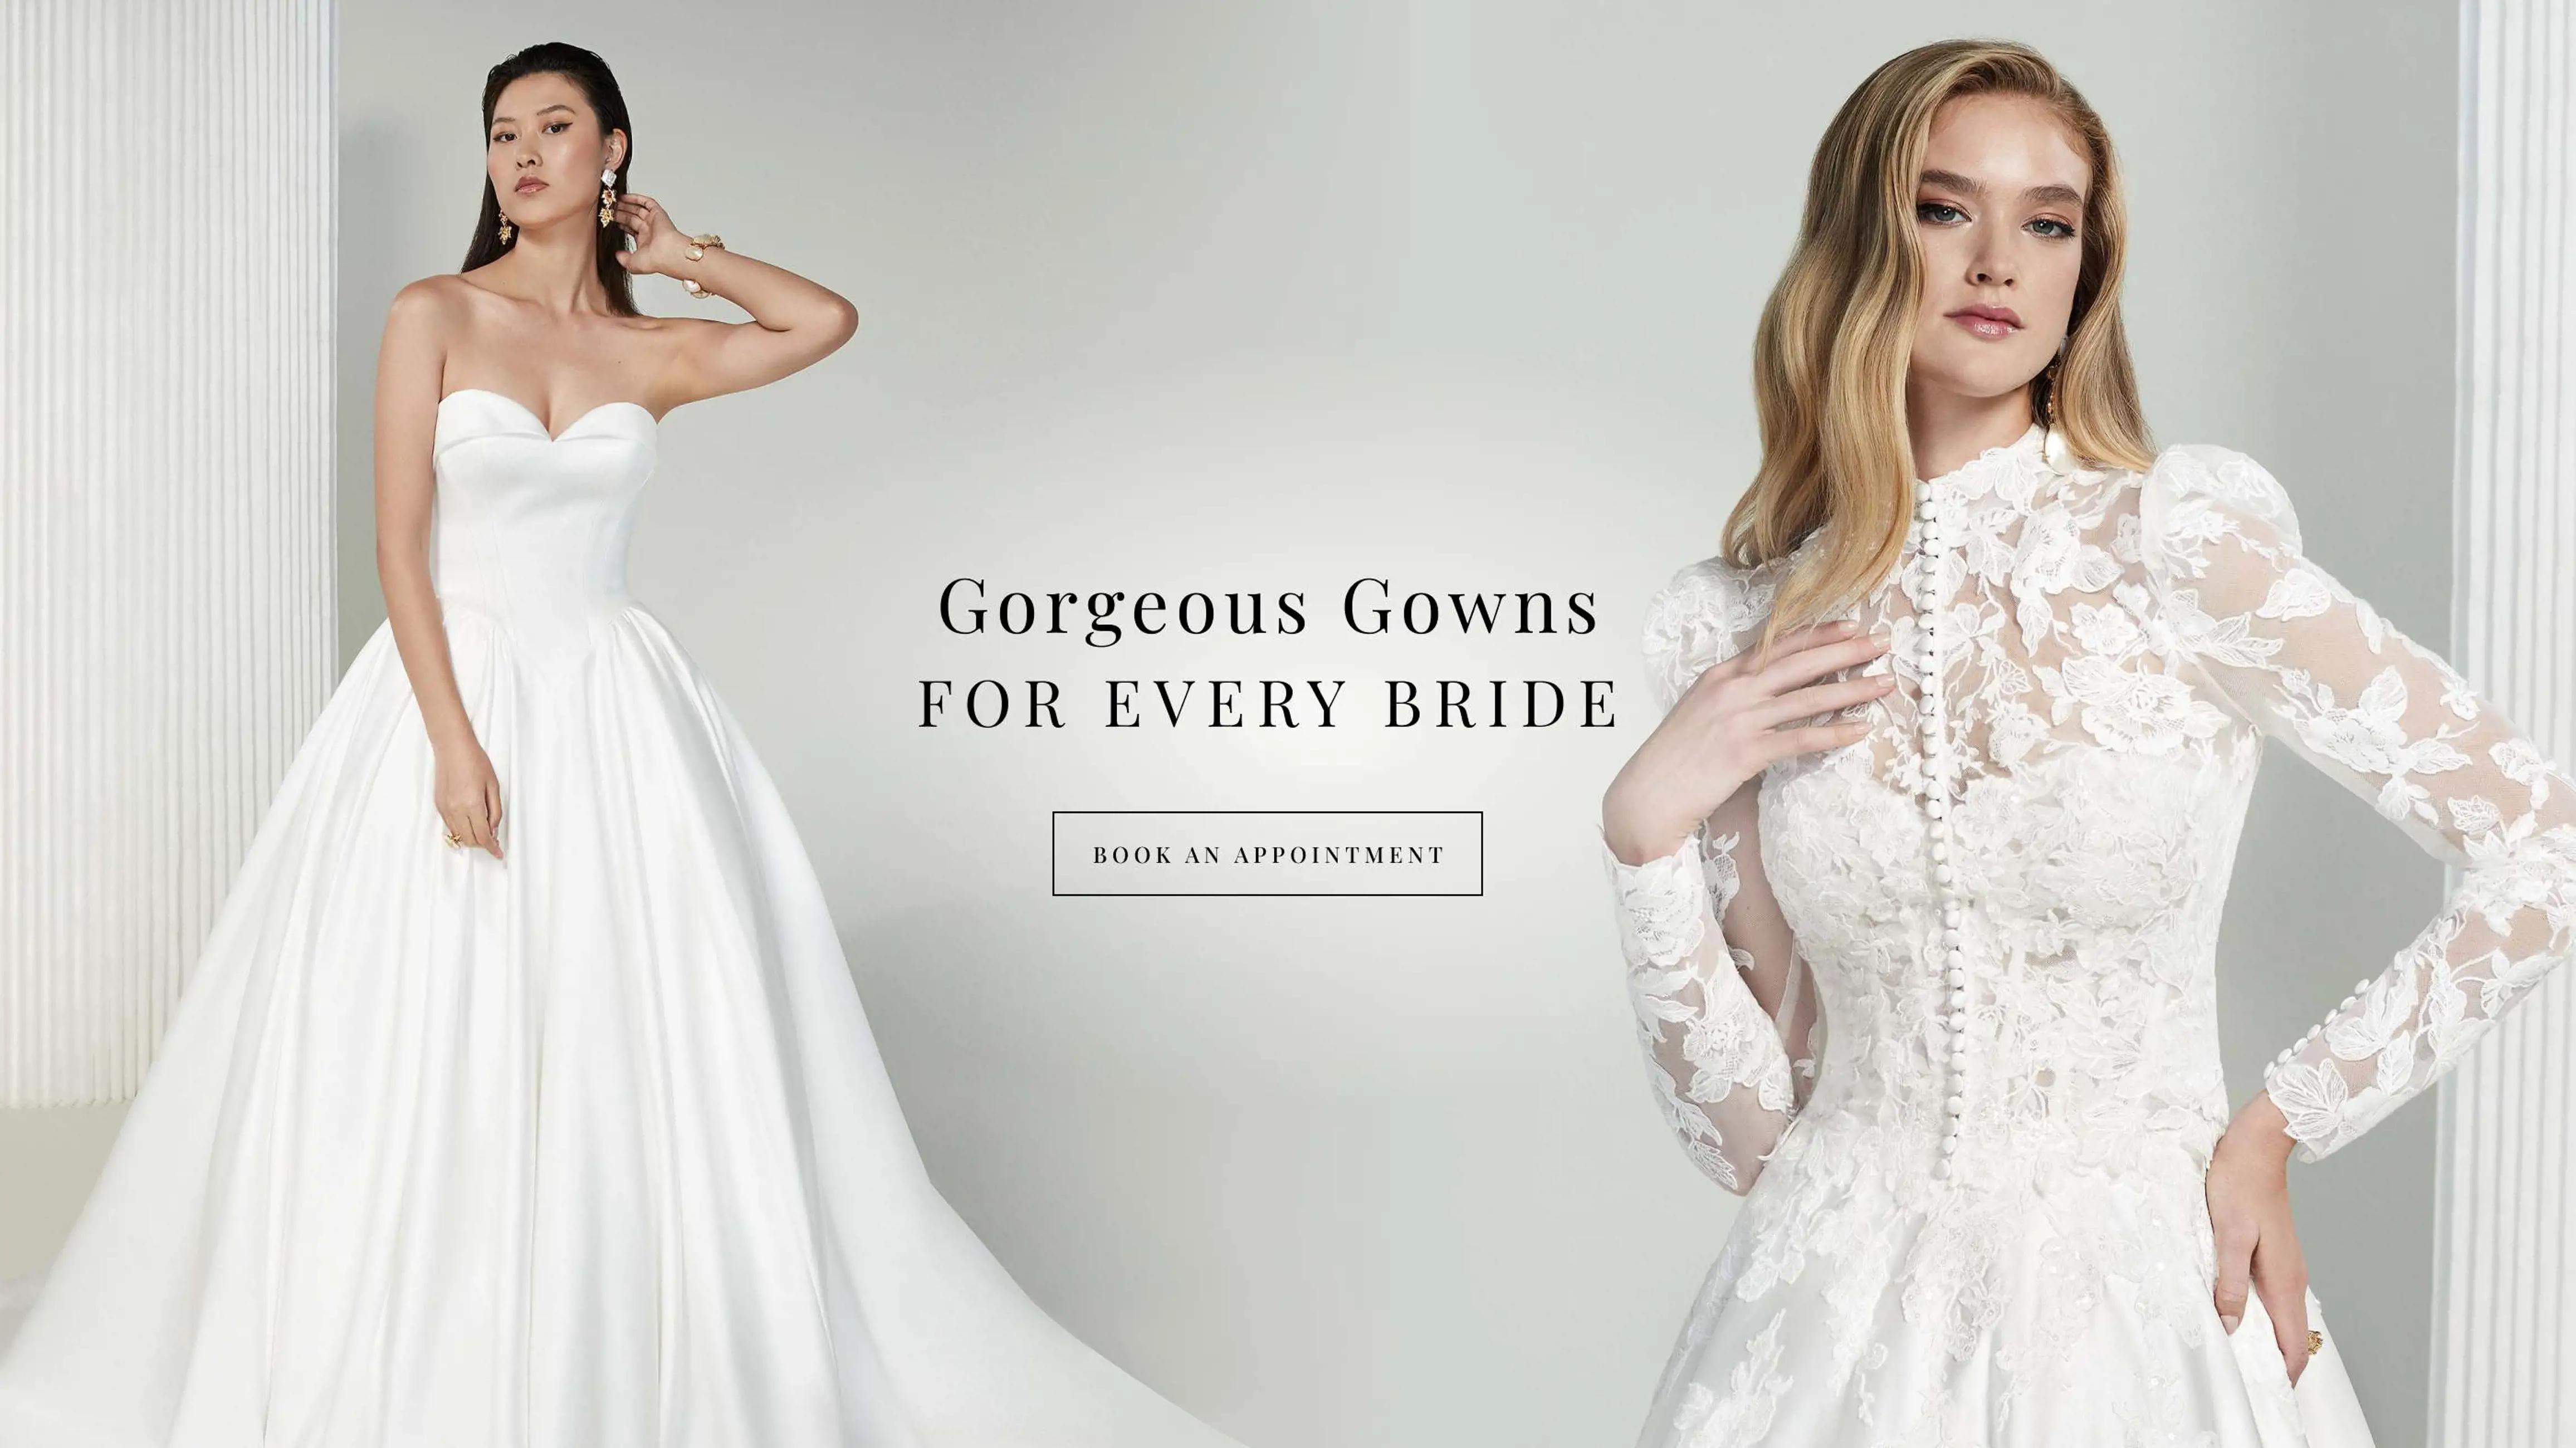 "Gorgeous Gowns For Every Bride" banner for desktop